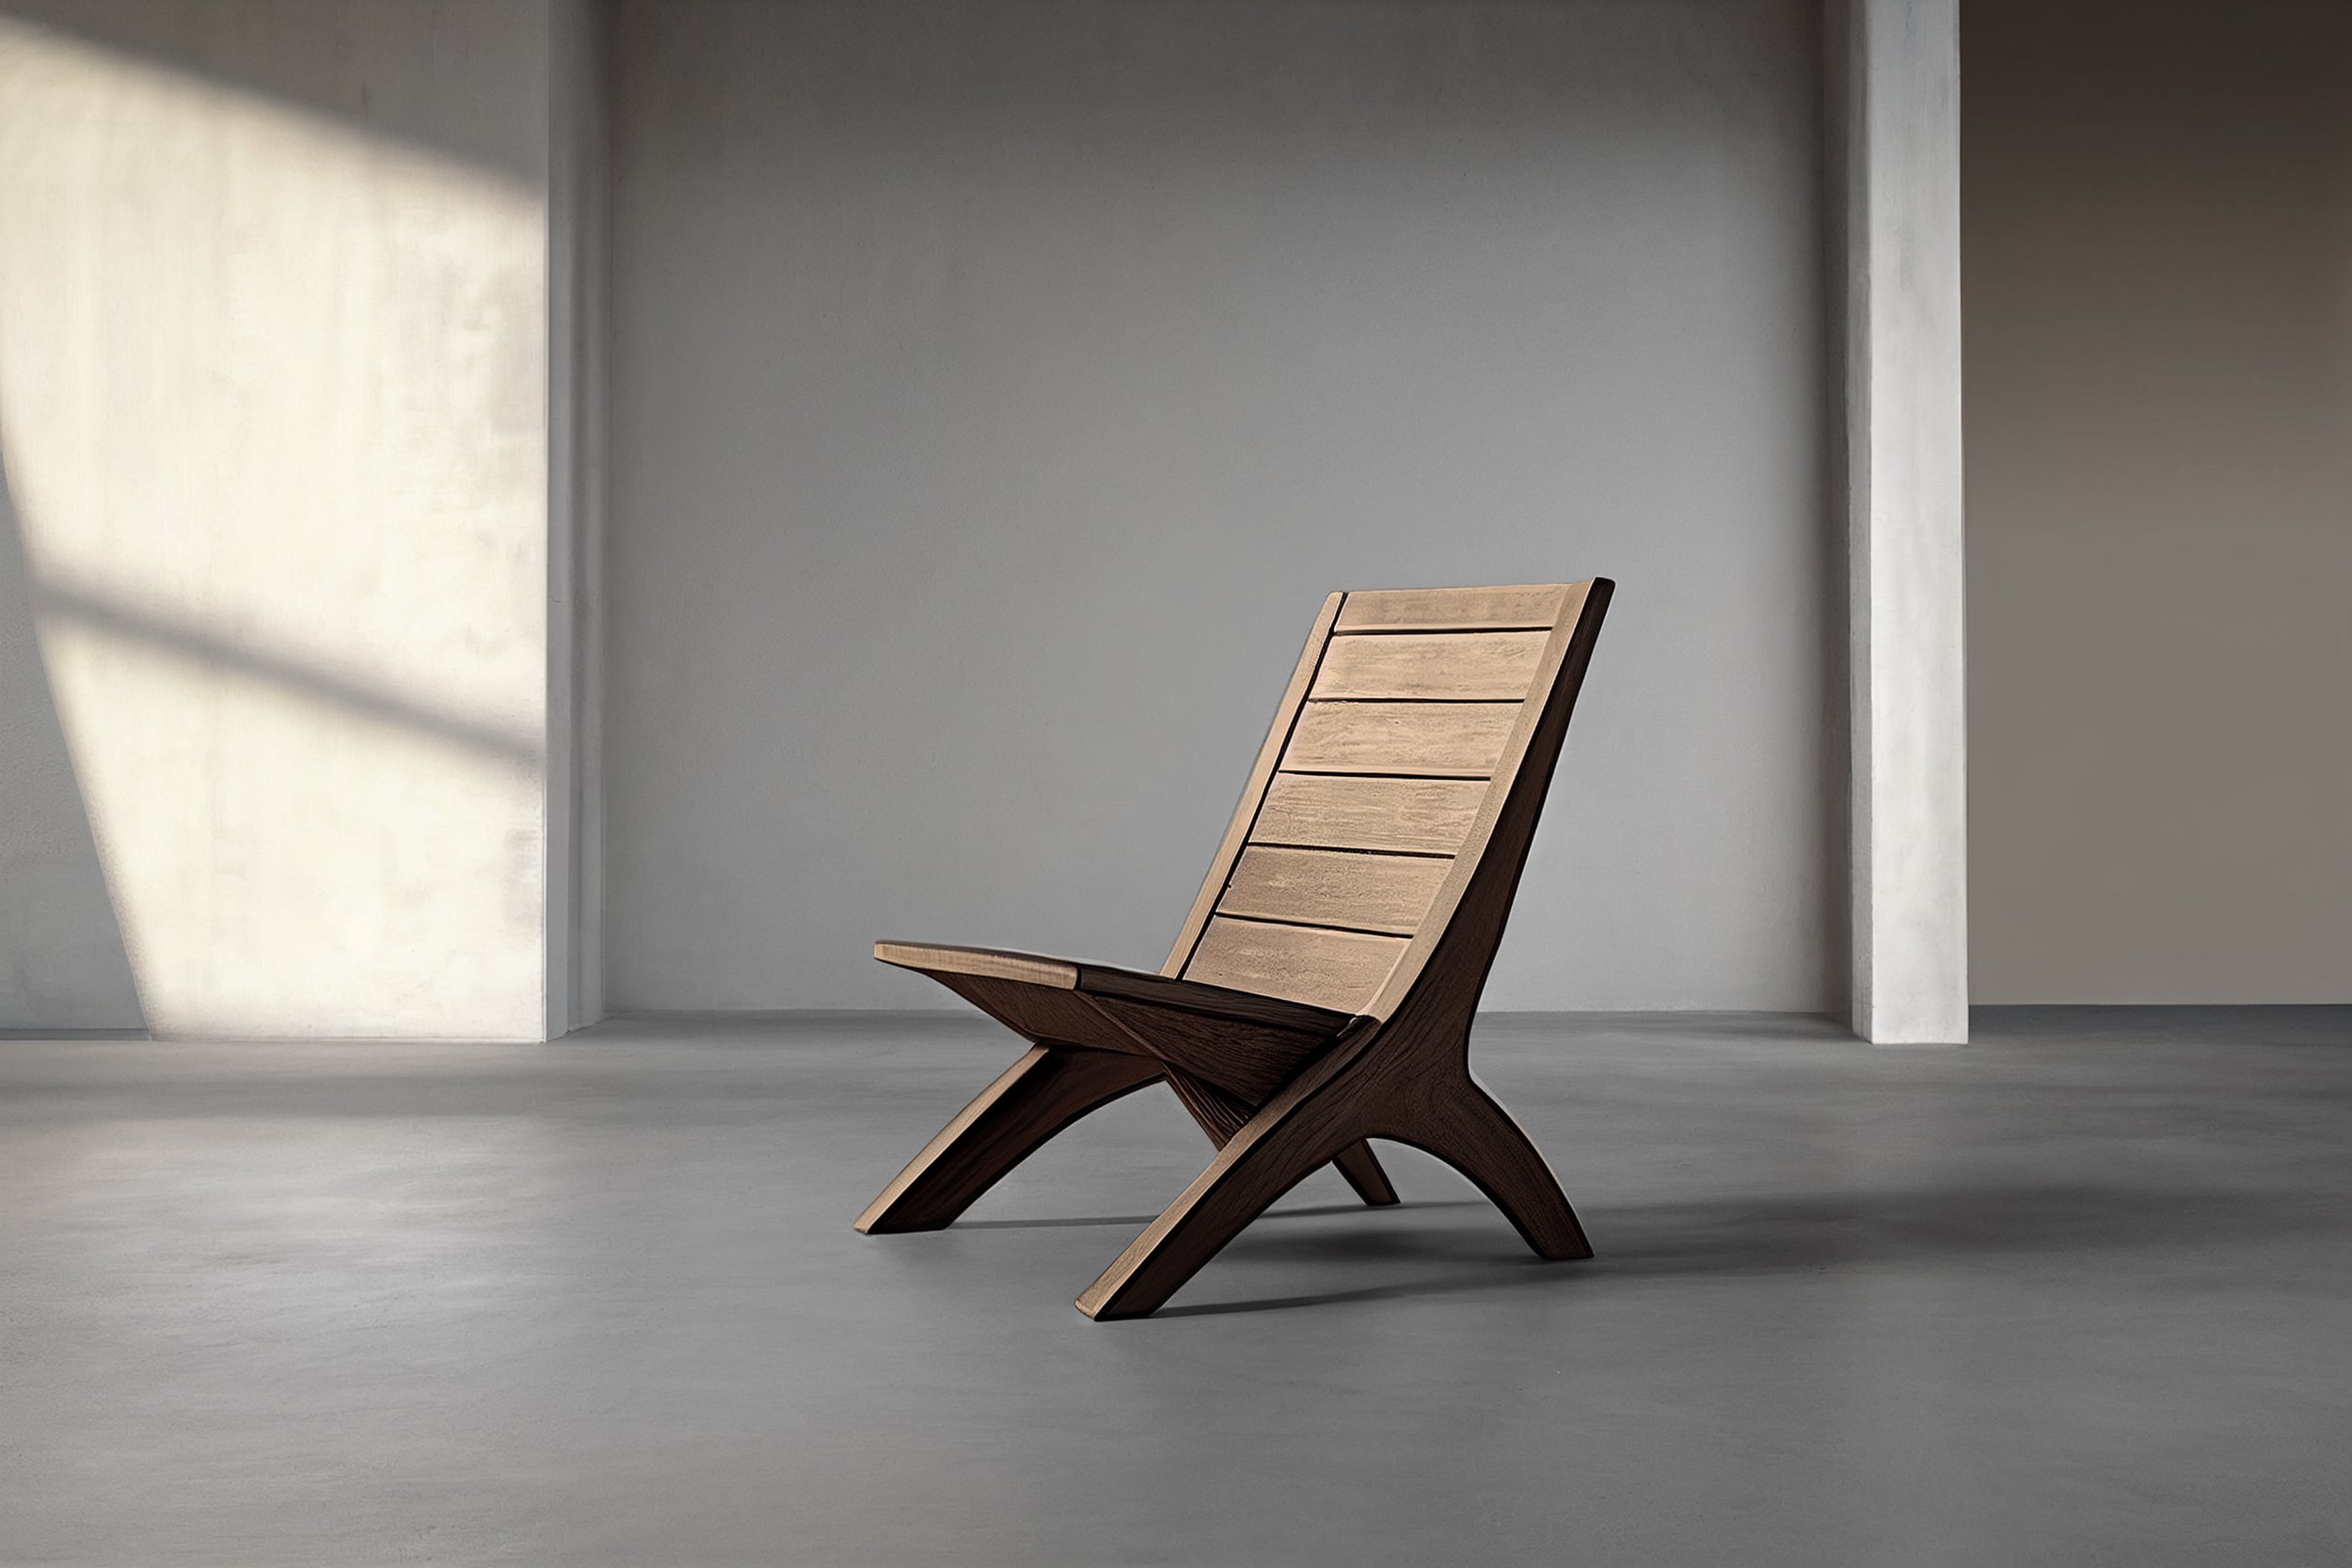 Butaque Lounge Chair Made of Solid Wood Inspired in Clara Porset Design  — 3.jpg